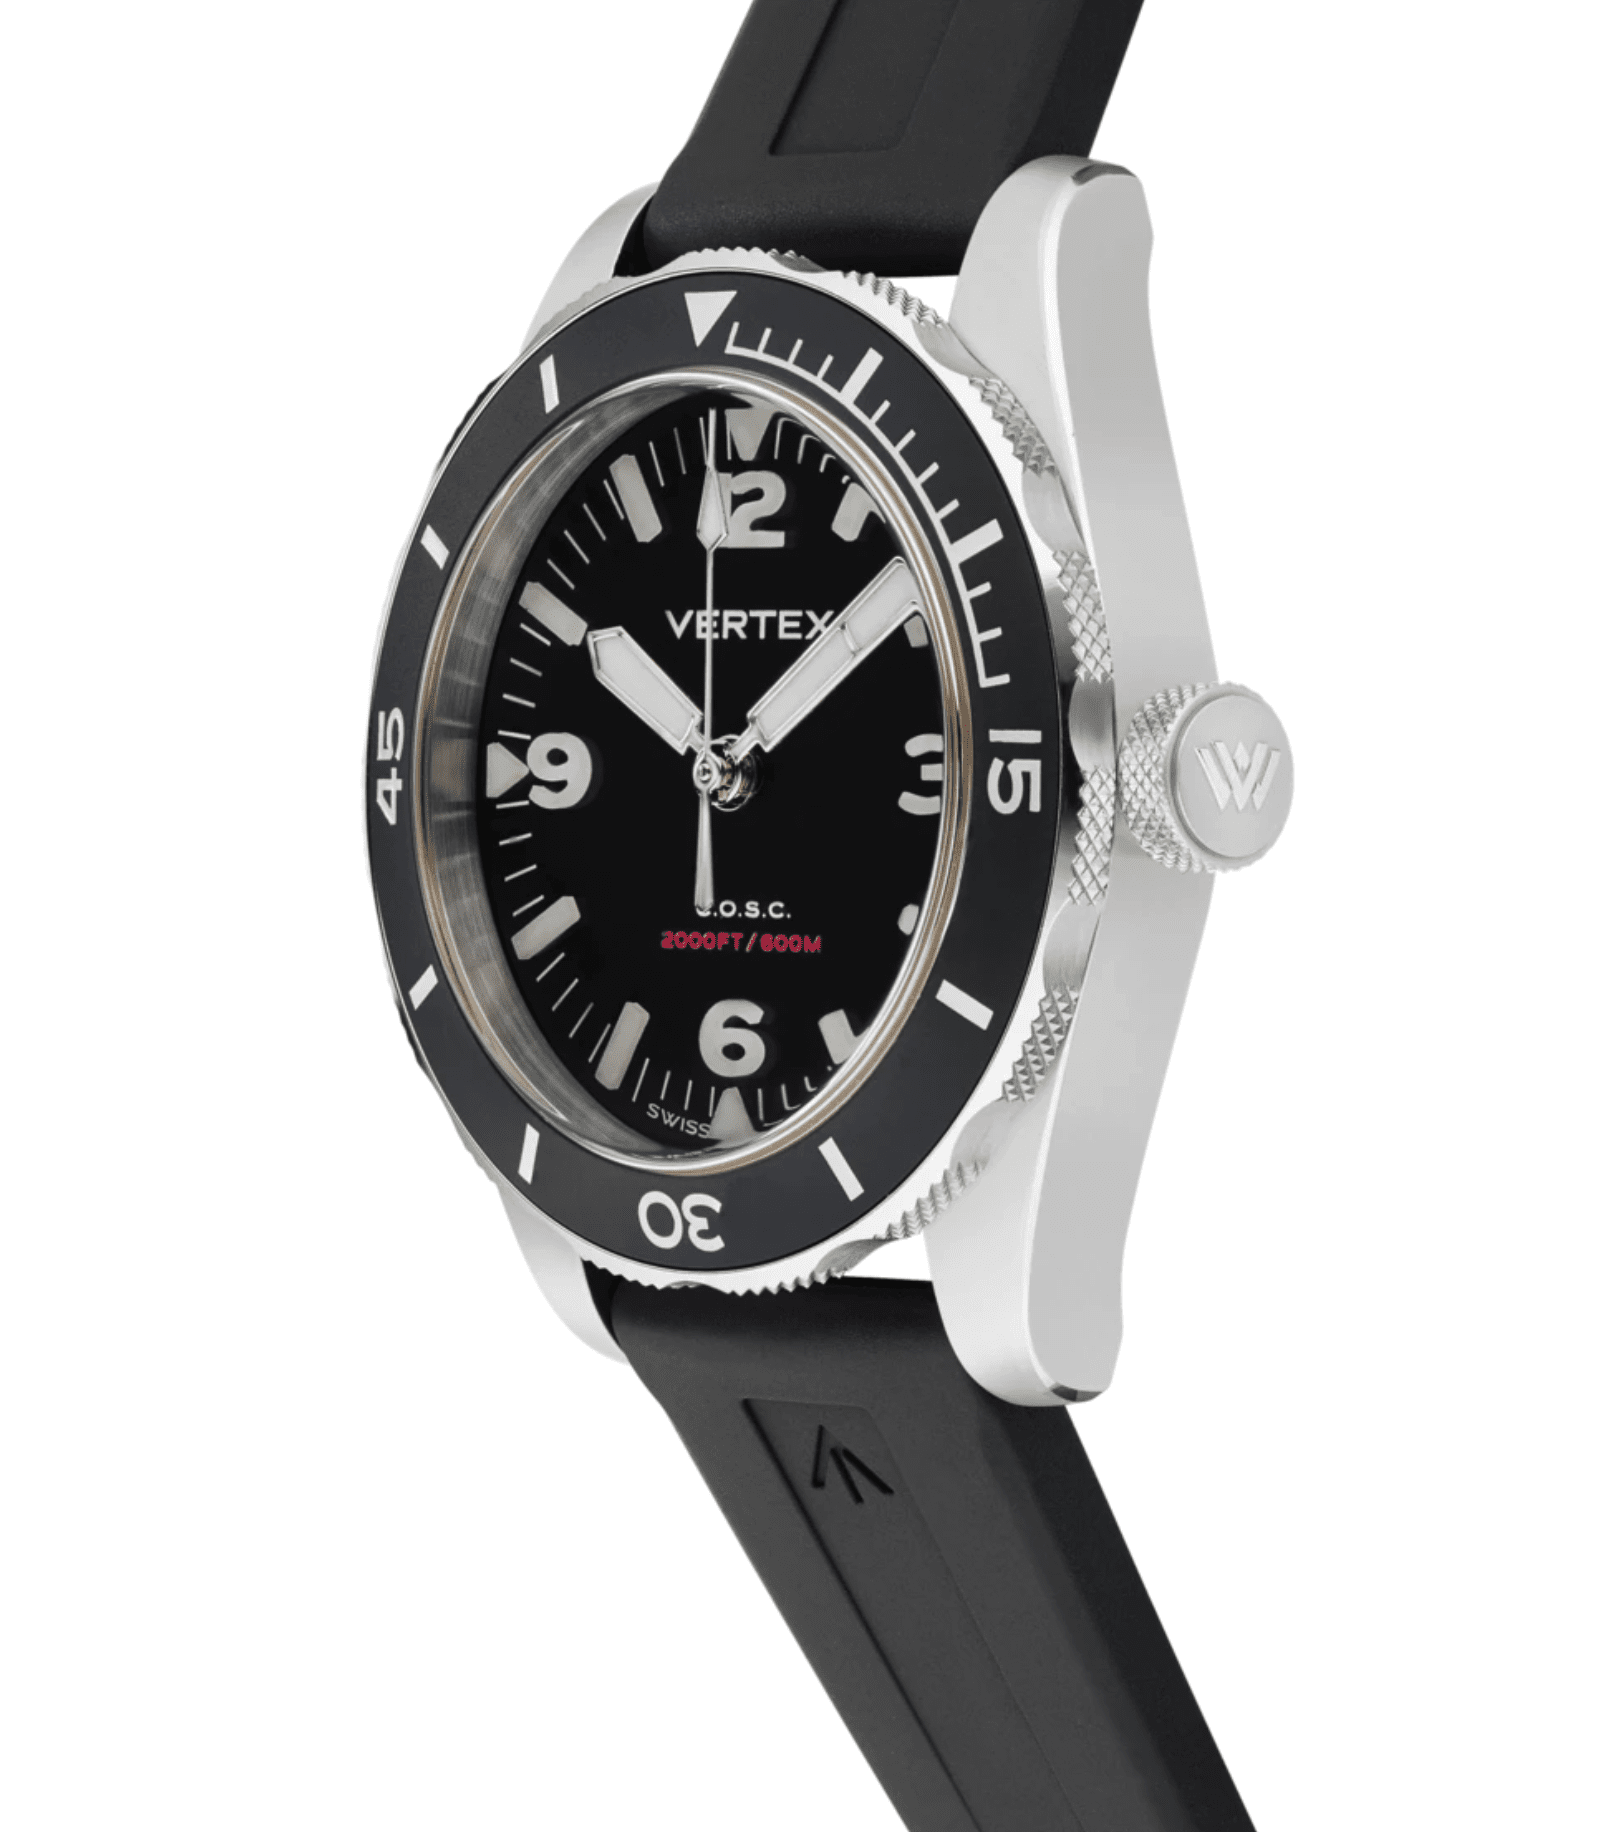 Vertex Launches All-New M-60 Aqualion Dive Watch Collection